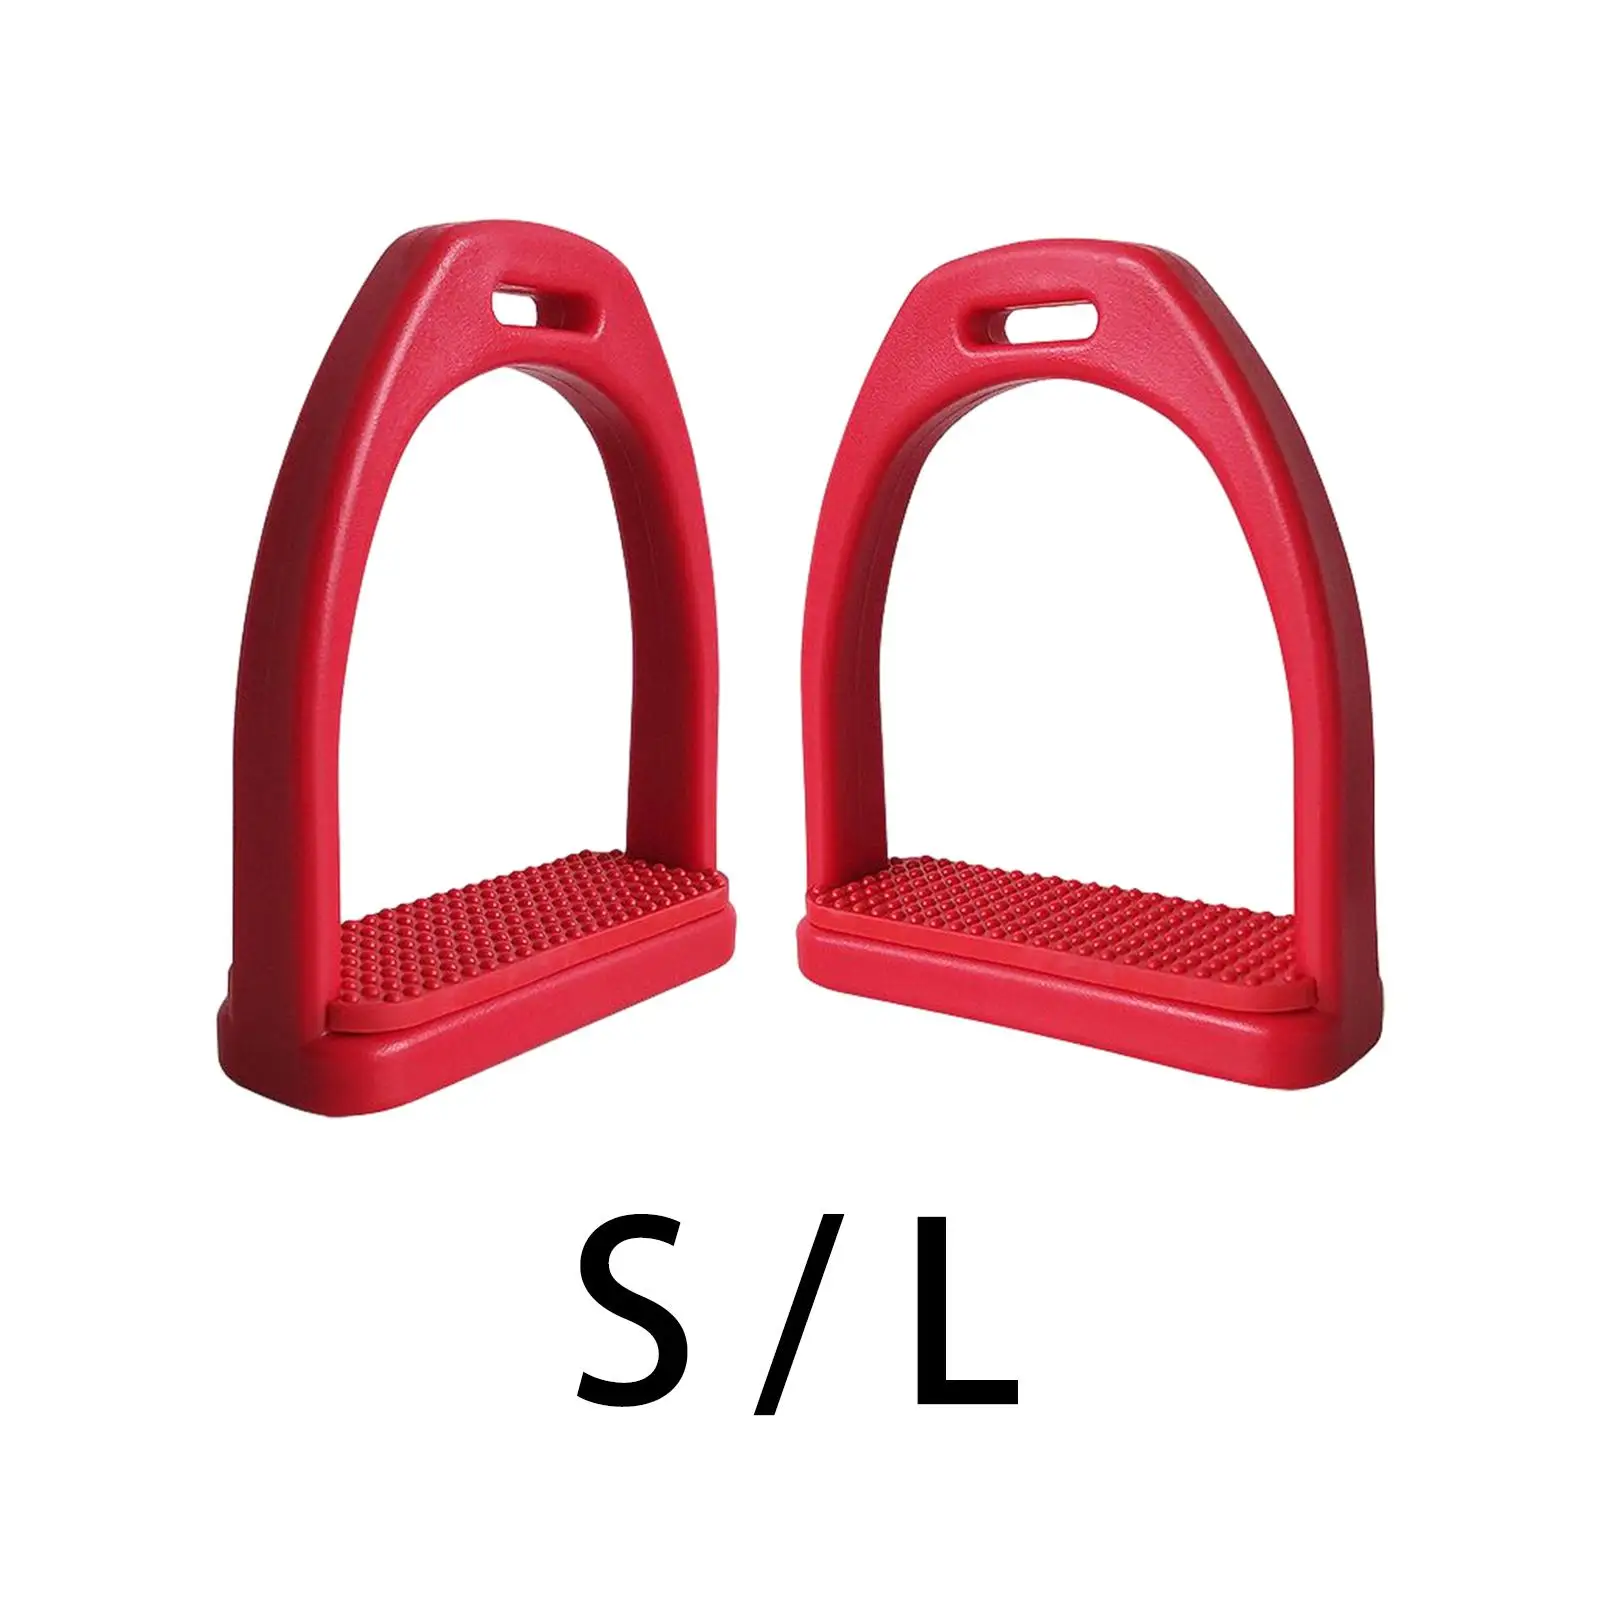 2x Horse Riding Stirrups Rubber Pad Equestrian Sports Lightweight Tool for Safety Horse Riding Outdoor Accessories Childen